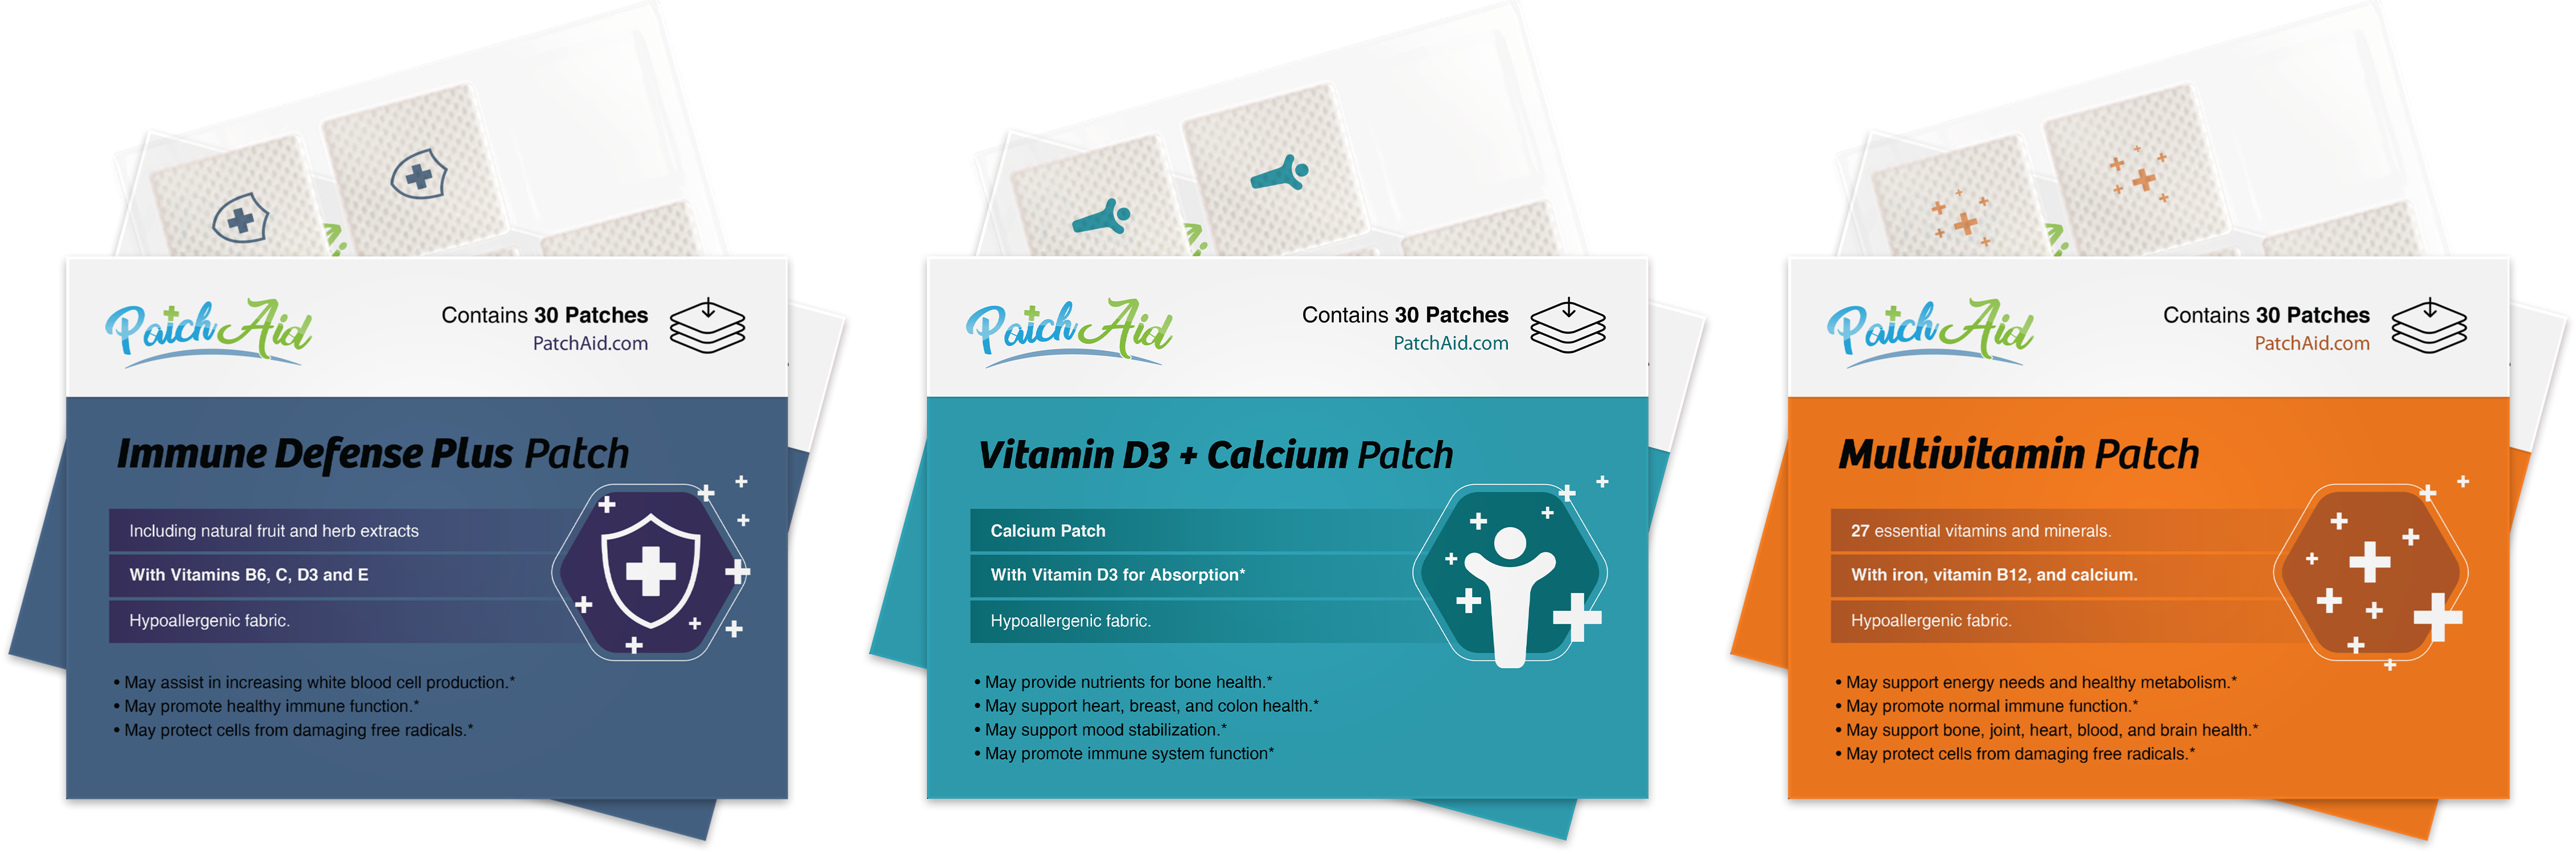 Women’s Health Patch Pack by PatchAid